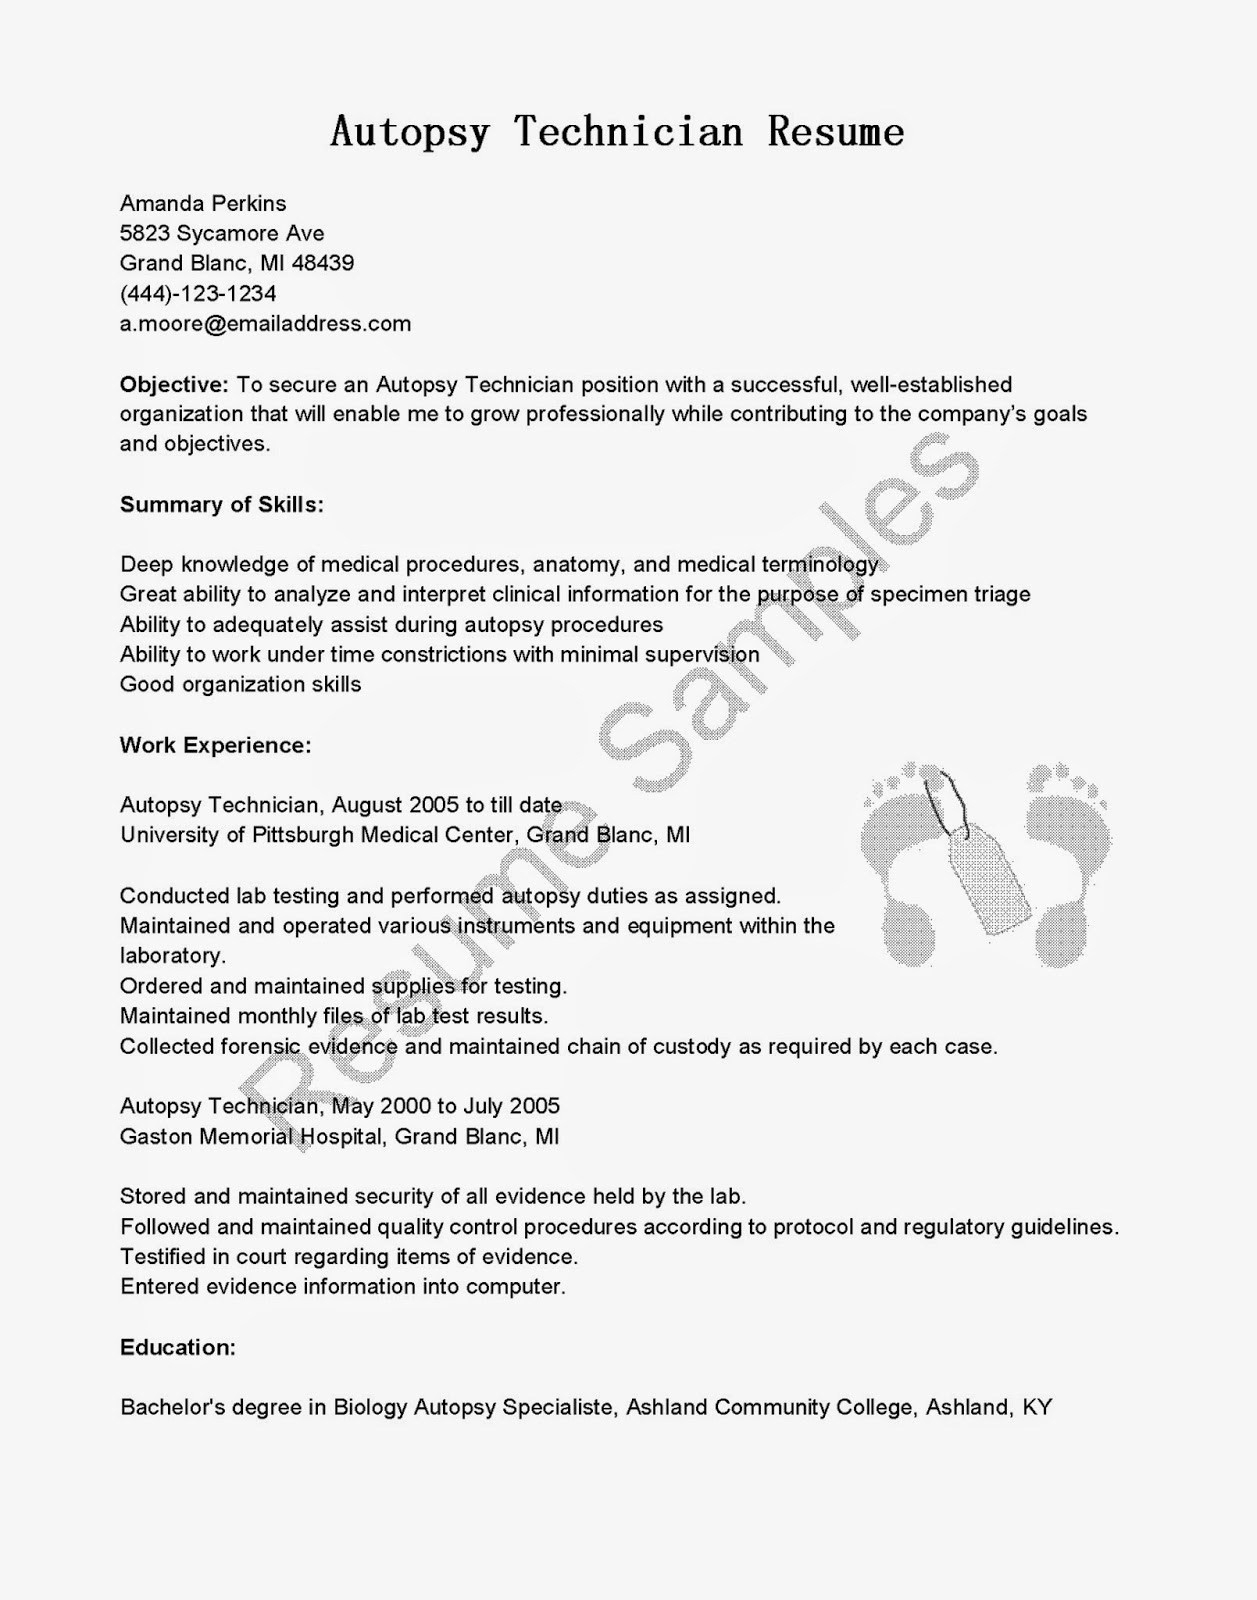 Sponsorship Cover Letter Template - Archaicawful Letter to Sponsor Child